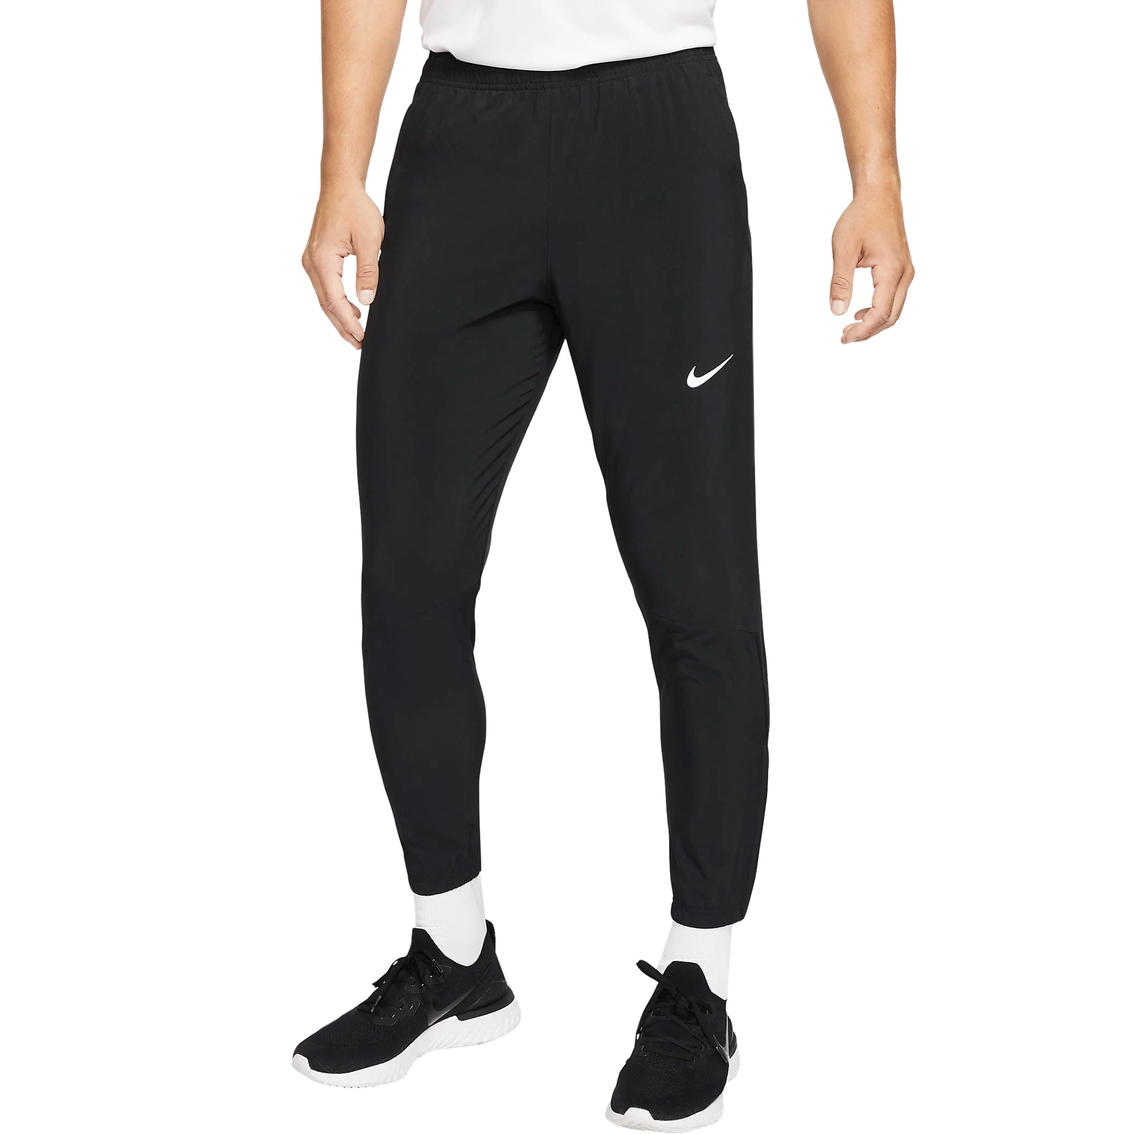 Nike Essential Dri Fit Woven Running Pants | Pants | Clothing ...